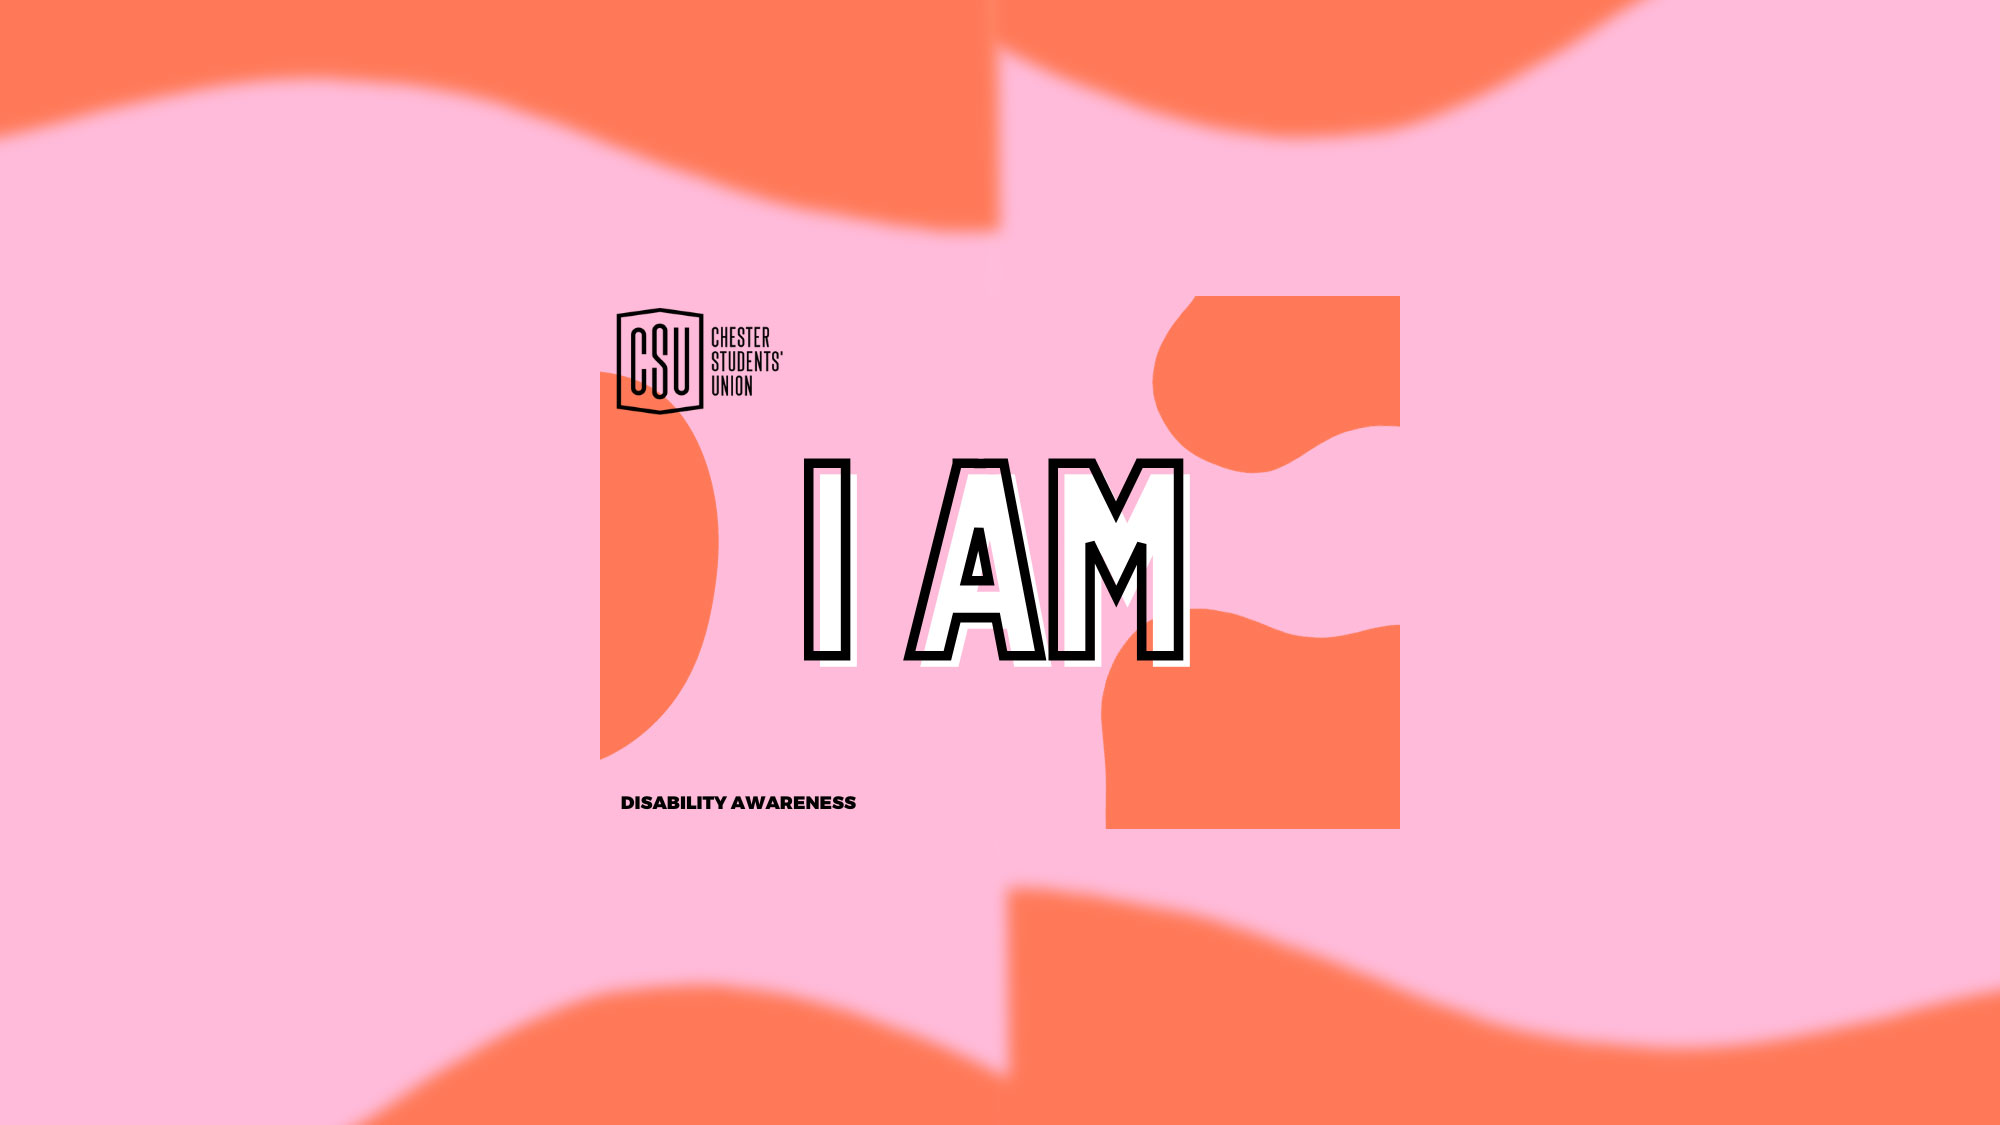 Chester Students’ Union: I AM Campaign